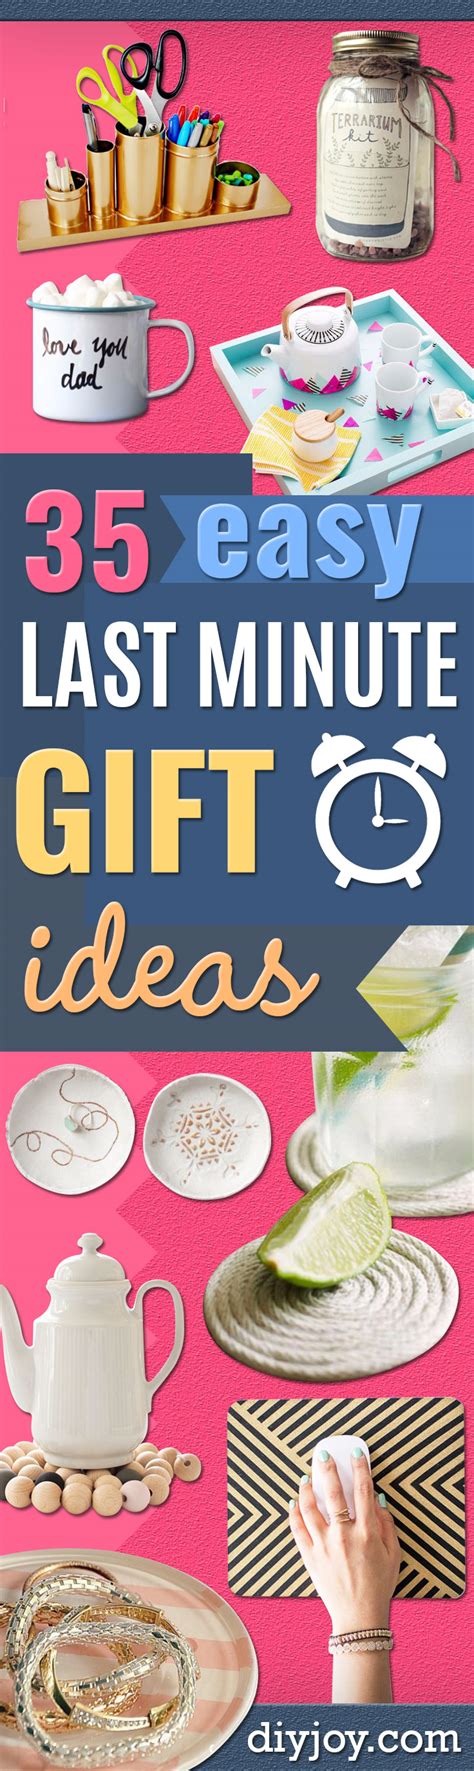 Jun 14, 2021 · 26 diy father's day gifts that are so easy to make for dad dad will love these easy, homemade craft ideas — even if you waited until the last minute! Last Minute Homemade Christmas Gift Ideas For Dad - Home ...